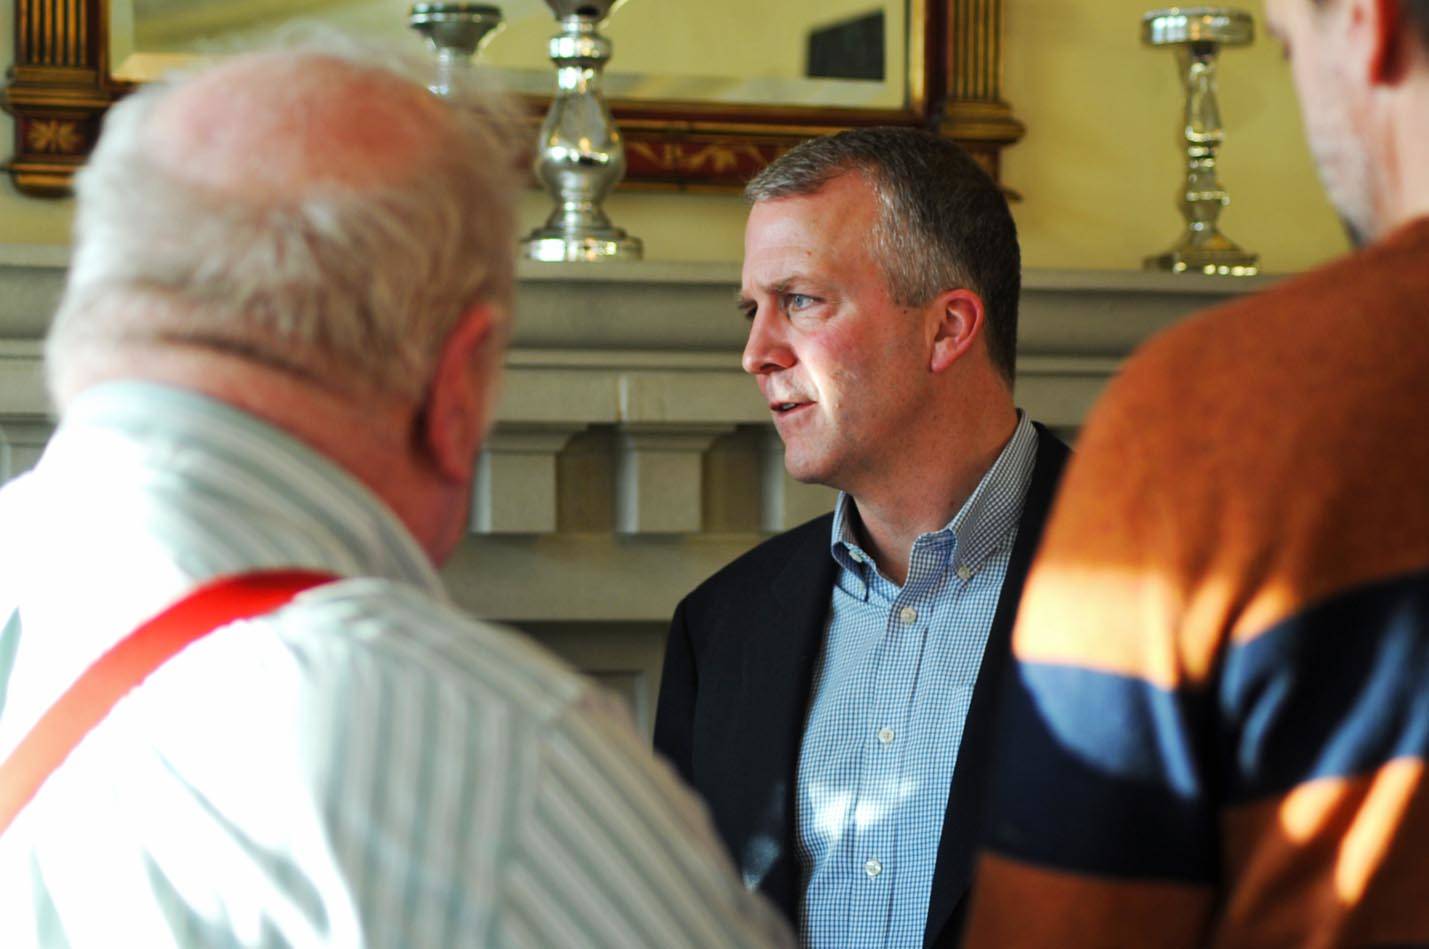 Sen. Dan Sullivan (R-Alaska) speaks to constituents after addressing the members of three Kenai- and Soldotna-area Rotary Clubs at Froso’s Restaurant on Monday in Soldotna. Sullivan, entering his third year as U.S. Senator for the state, said he found reasons to be optimistic about federal actions regarding the state in 2018. (Photo by Elizabeth Earl/Peninsula Clarion)